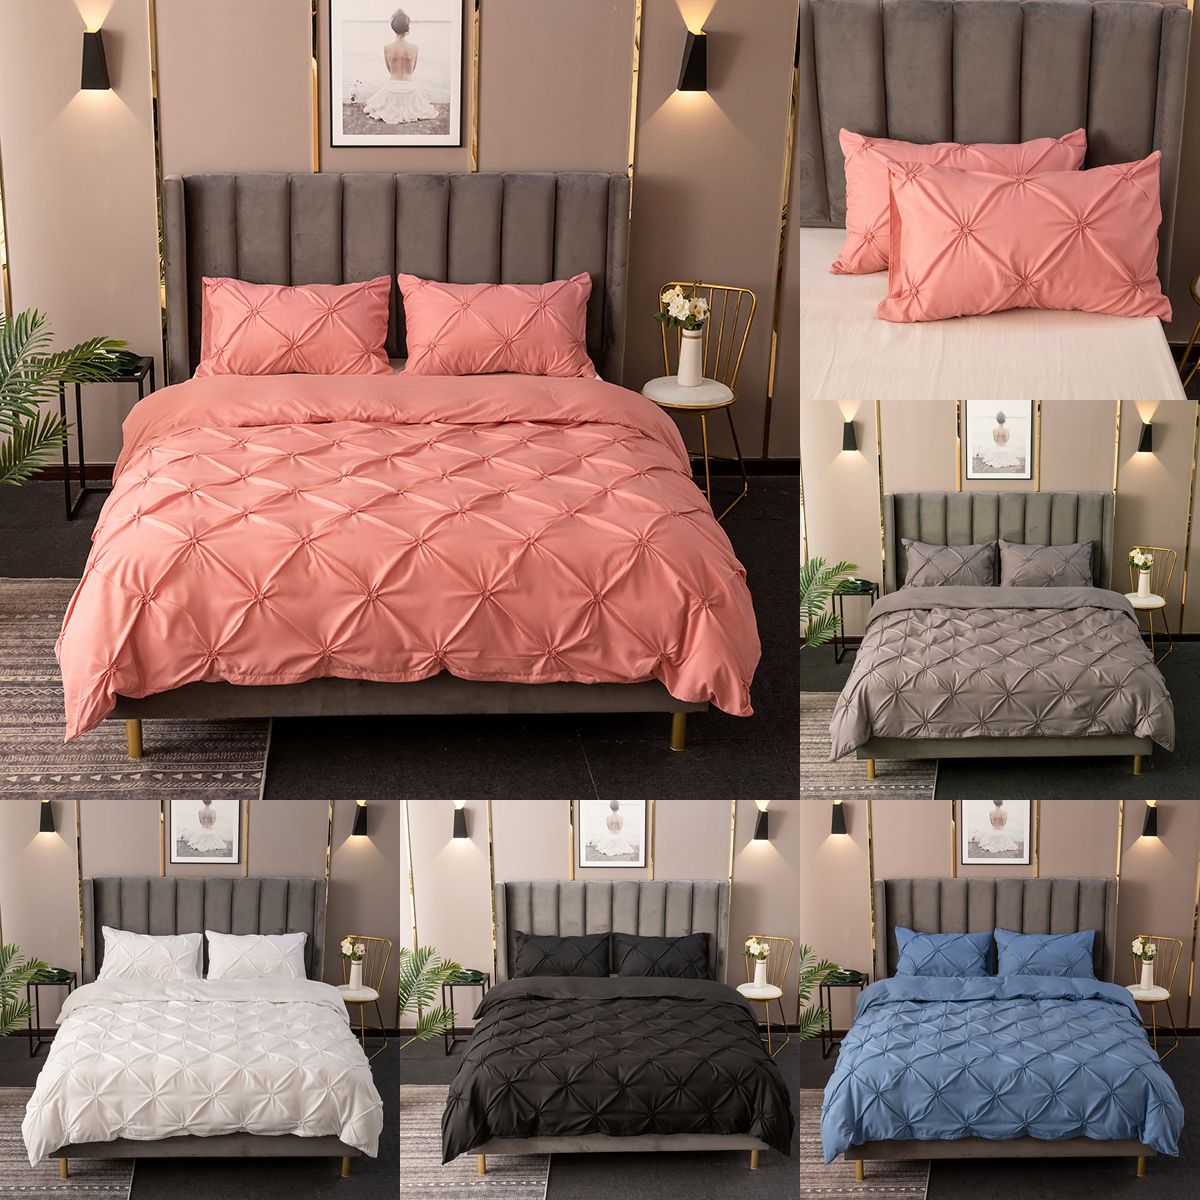 Jarl Home Three Dimensional Embossing Bedding Sets With Zipper